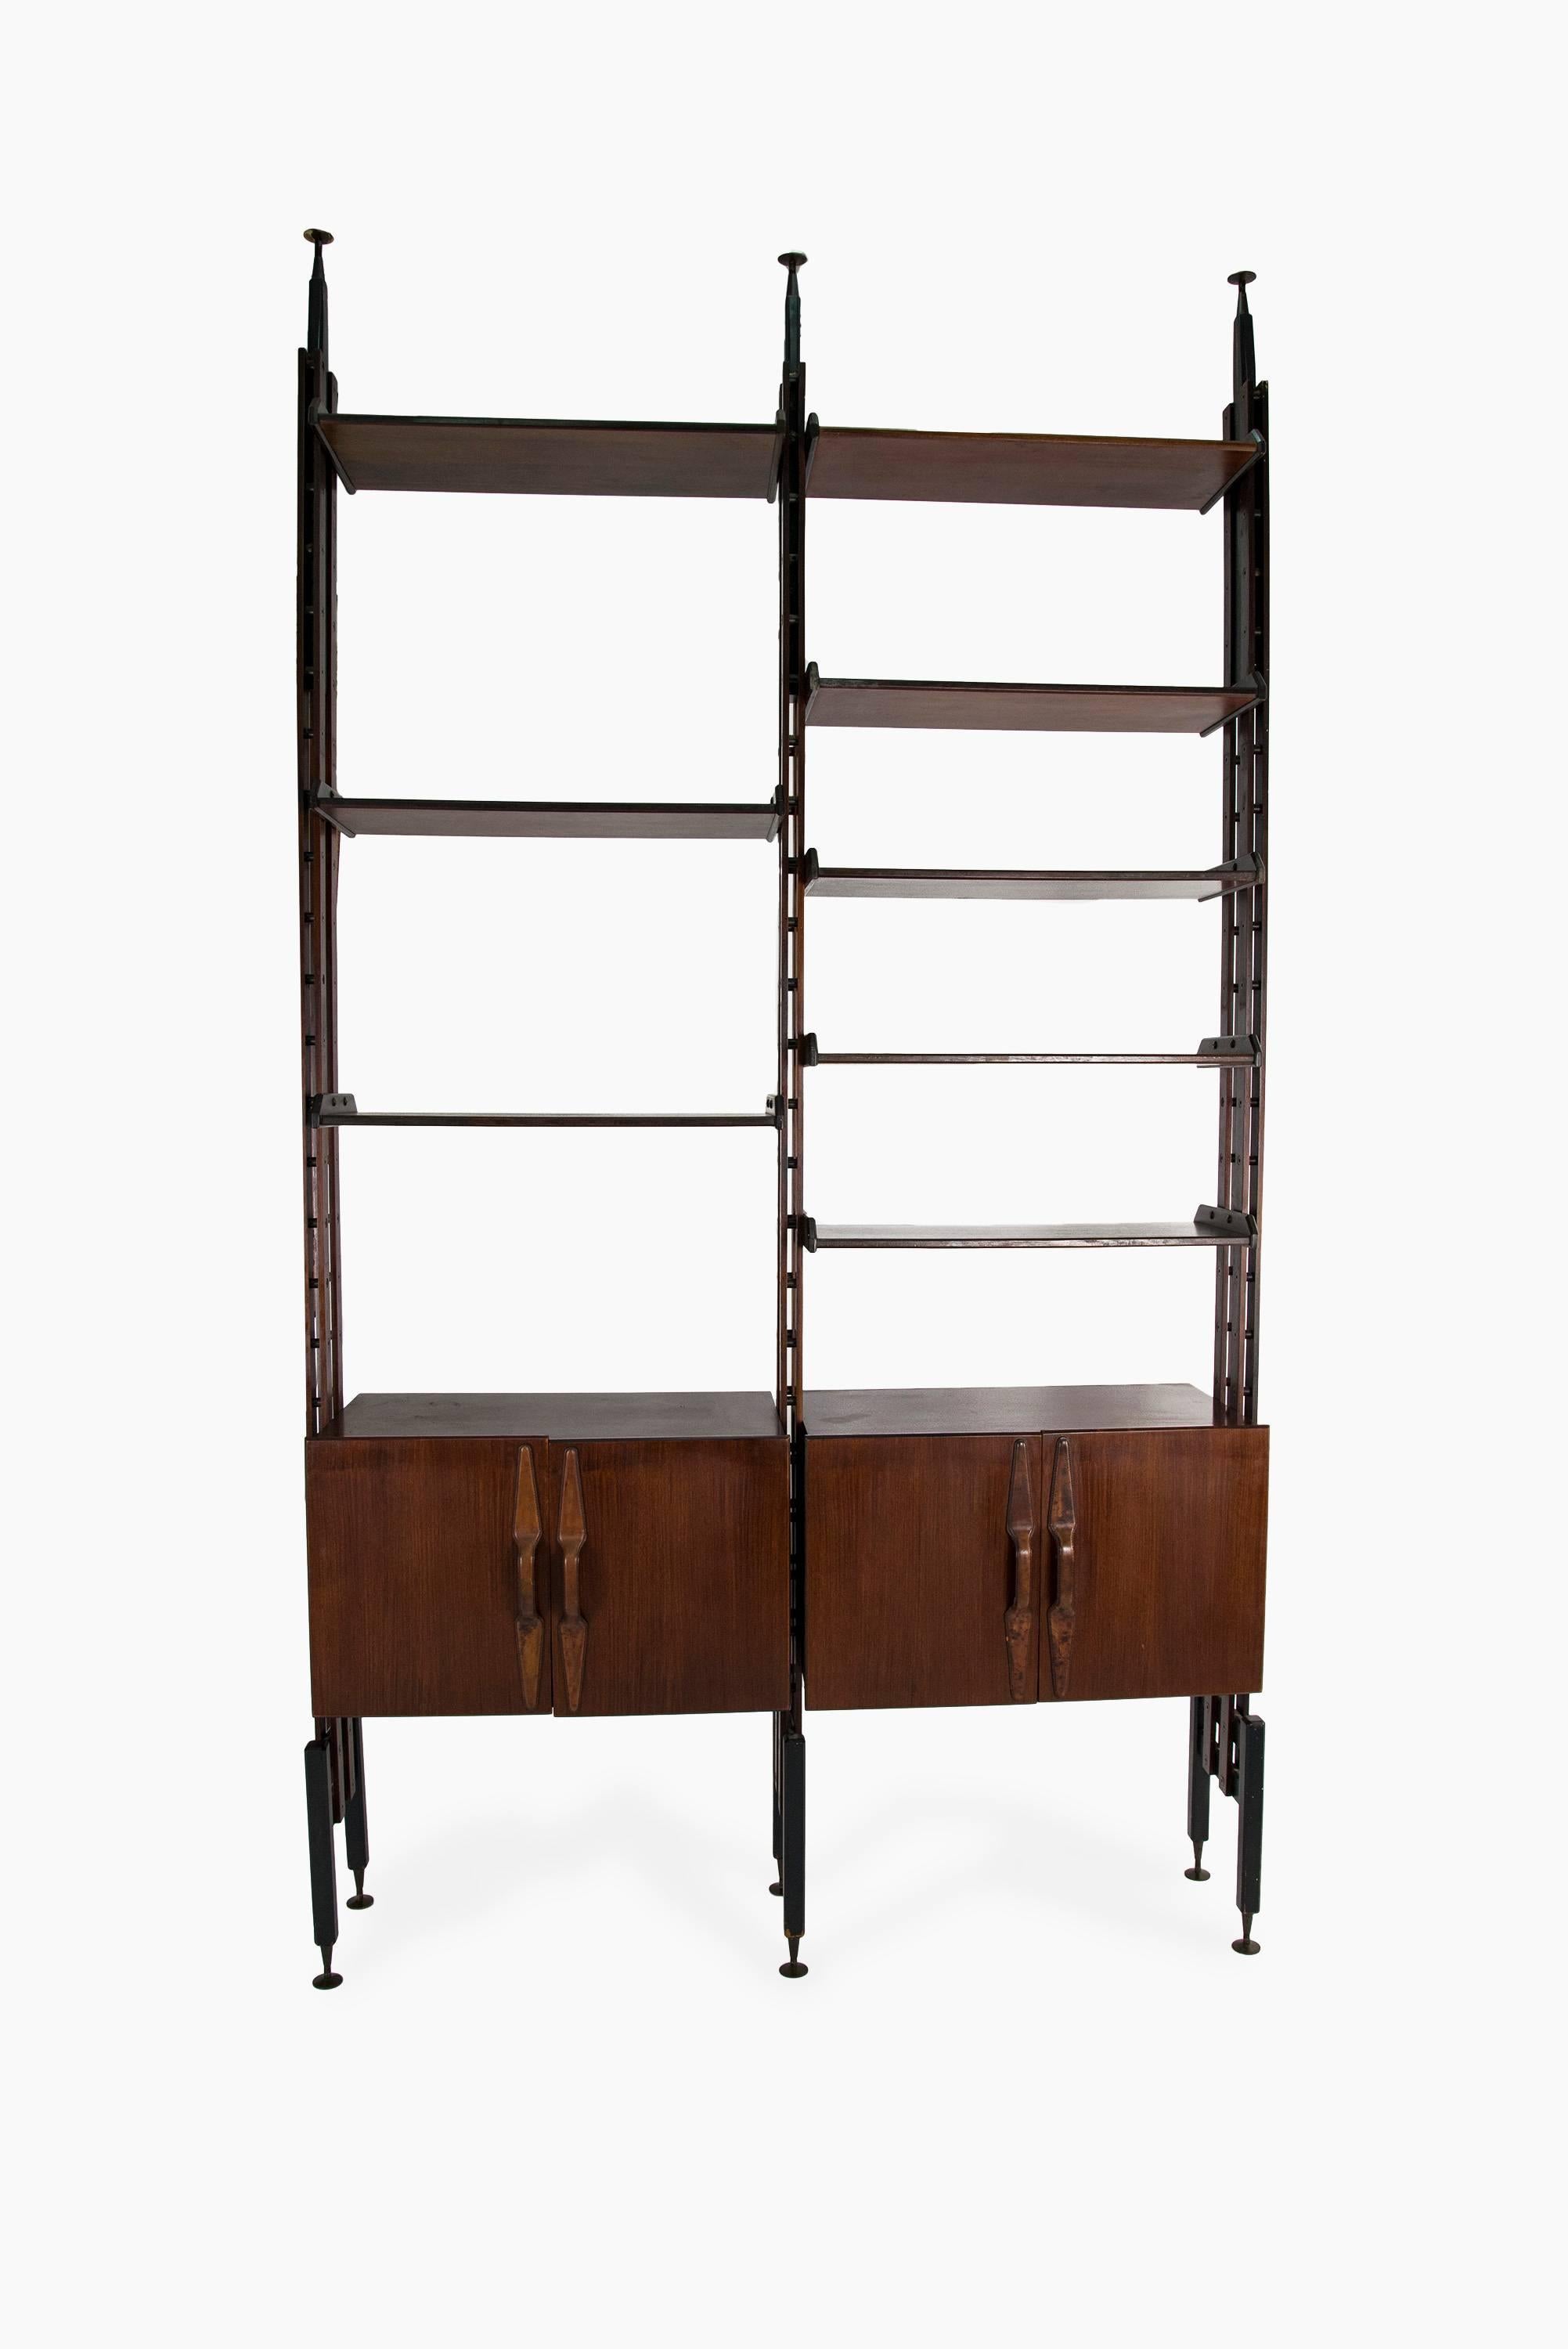 Large organic floor to ceiling bookcase manufactured in Italy in the late 1950s. Rosewood structure with two cabinets and eight shelves, brass feet, leather handles. The shelves and cabinets can be mounted with the preferred configuration, the